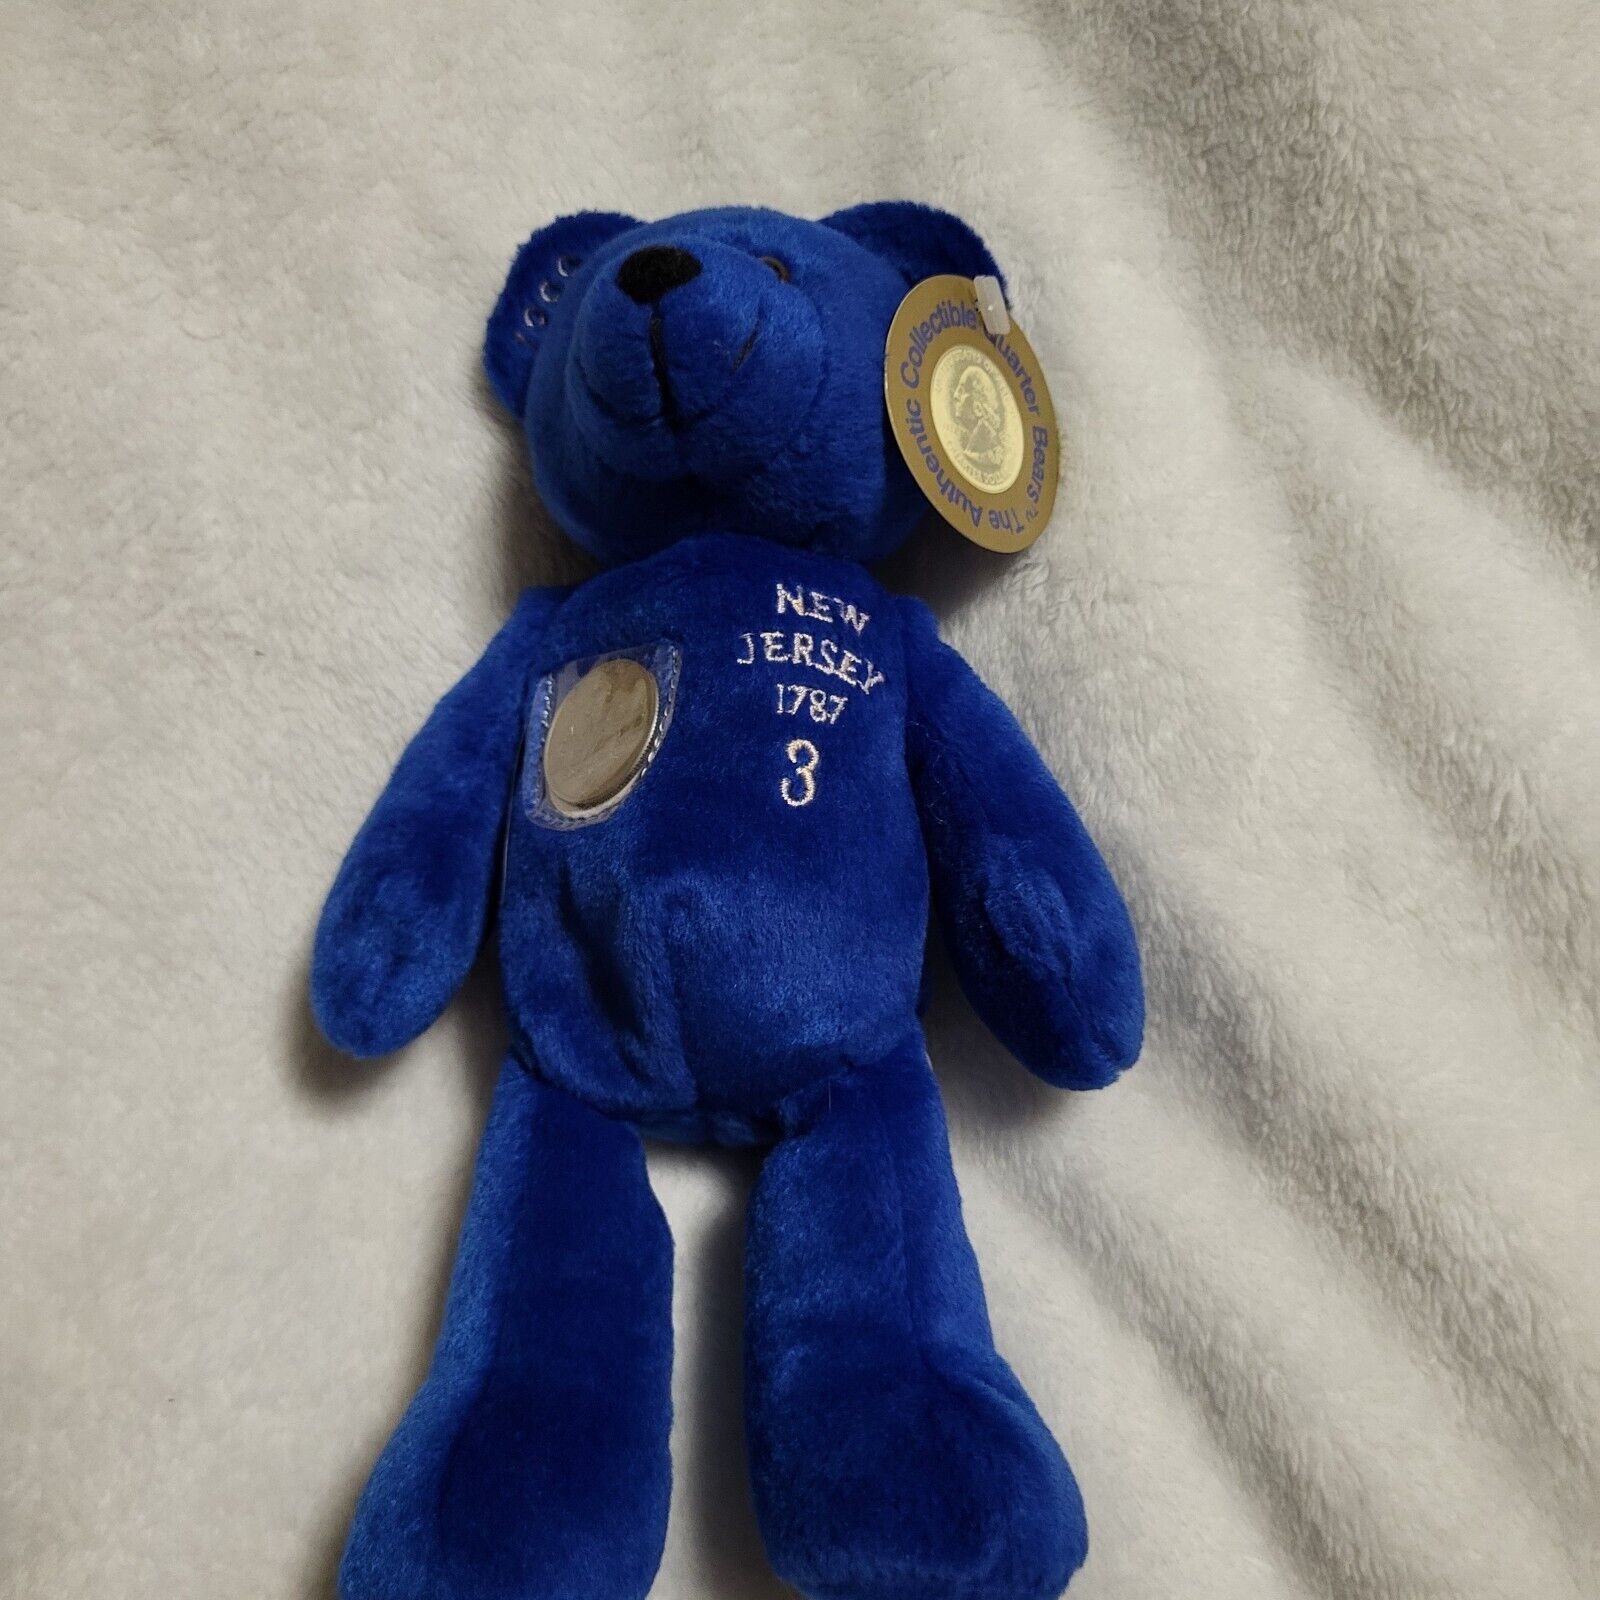 Timeless Toys Quarter Bear 1999 #3 New Jersey Plush Beanie Collectible